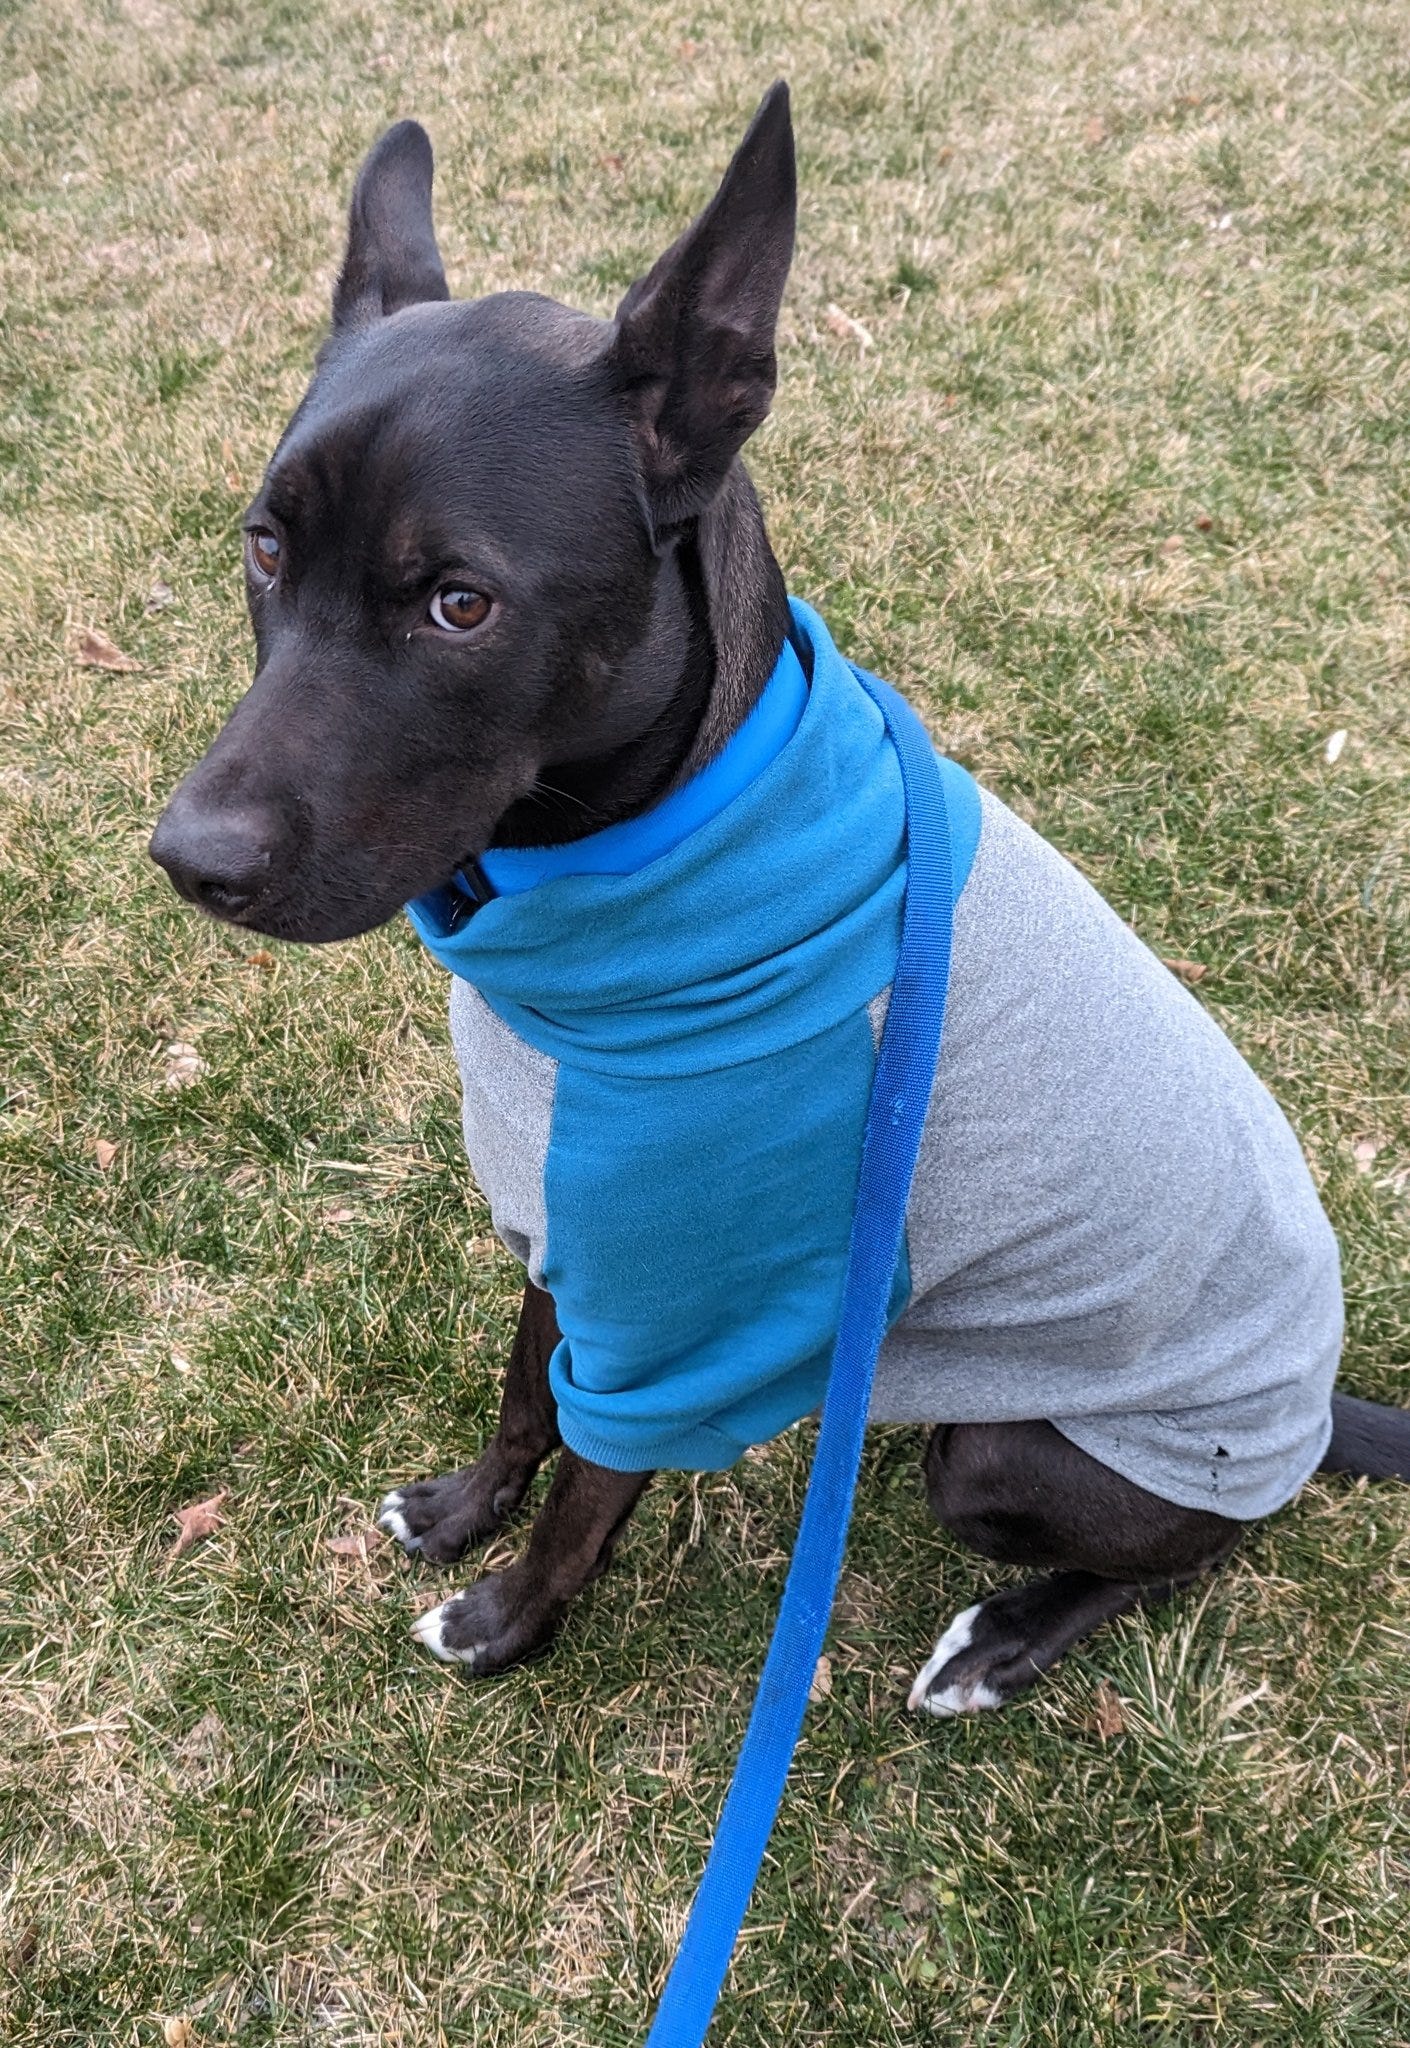 Atlas, a mostly black pit bull/husky/German shepherd mix, wearing a grey and turquoise turtleneck sweater while sitting on some grass